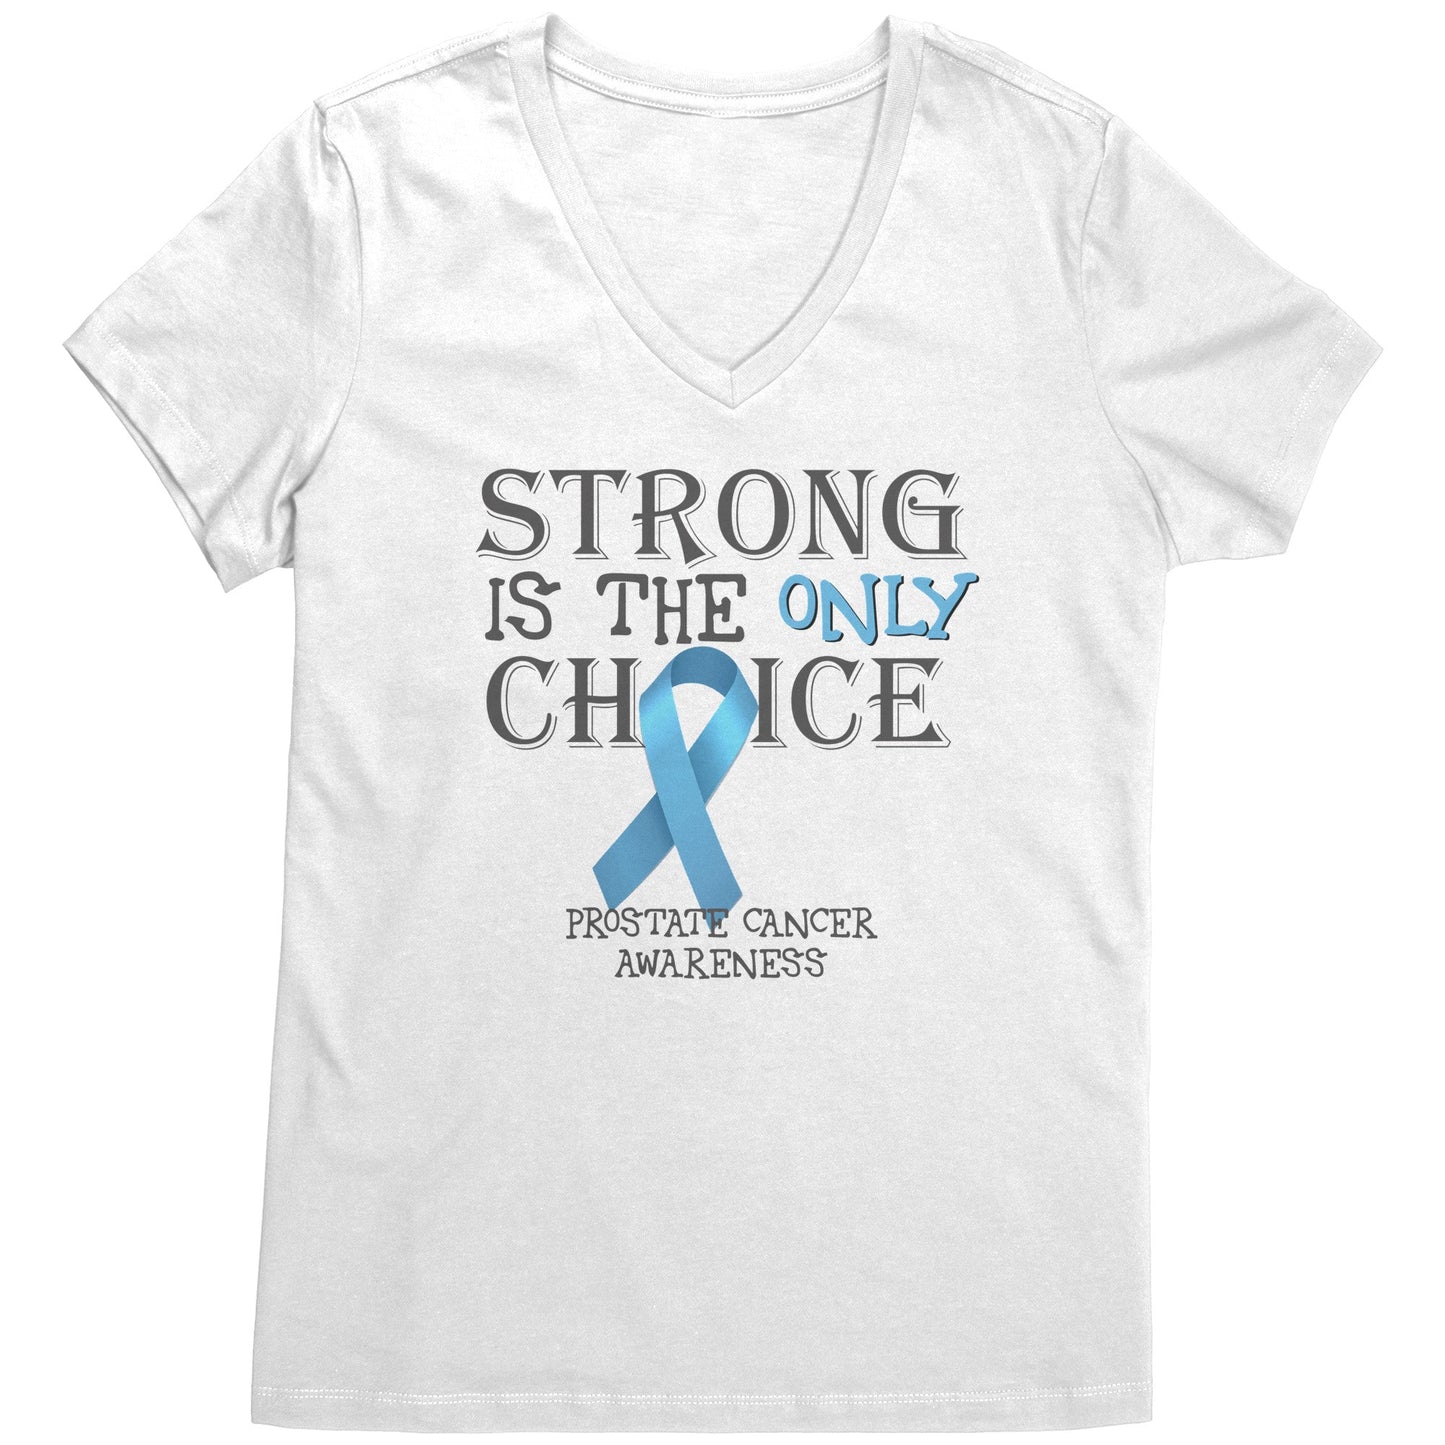 Strong is the Only Choice -Prostate Cancer Awareness T-Shirt, Hoodie, Tank |x|